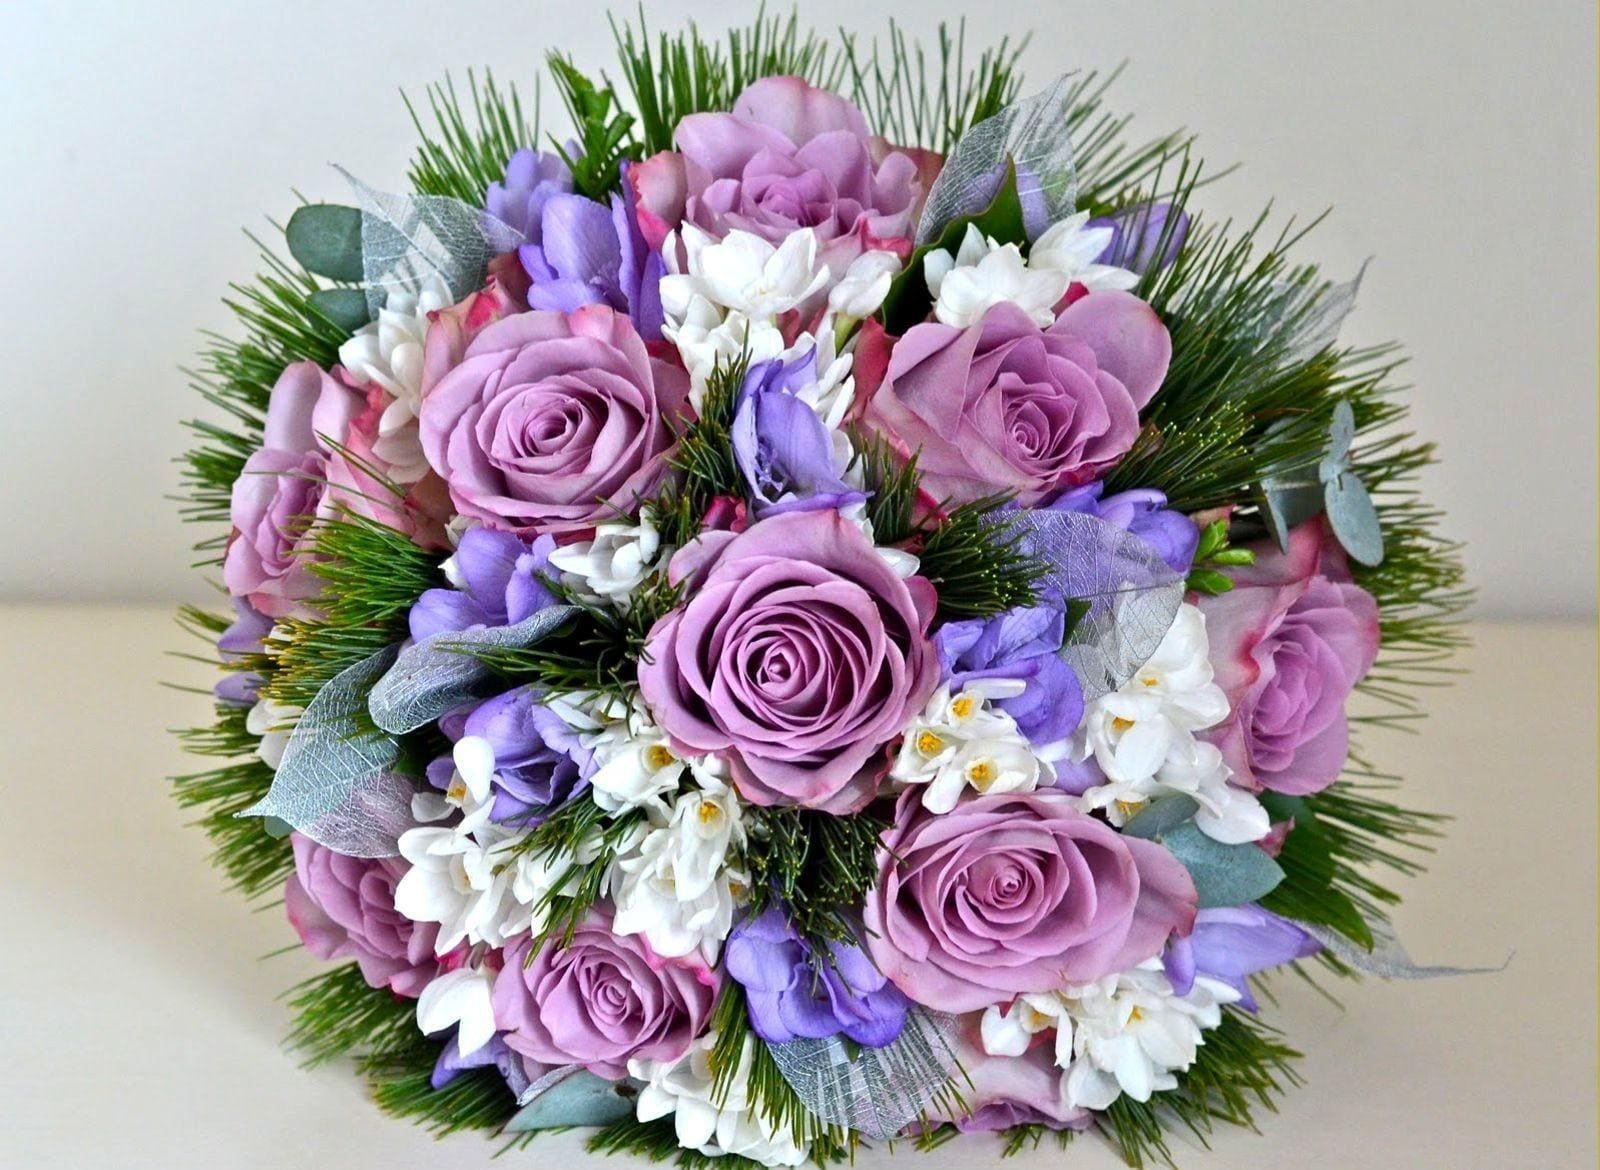 Mazzo Di Fiori Bellissimi.Pictures Of Beautiful Bouquets Of Flowers 80 Pieces Of Stunning